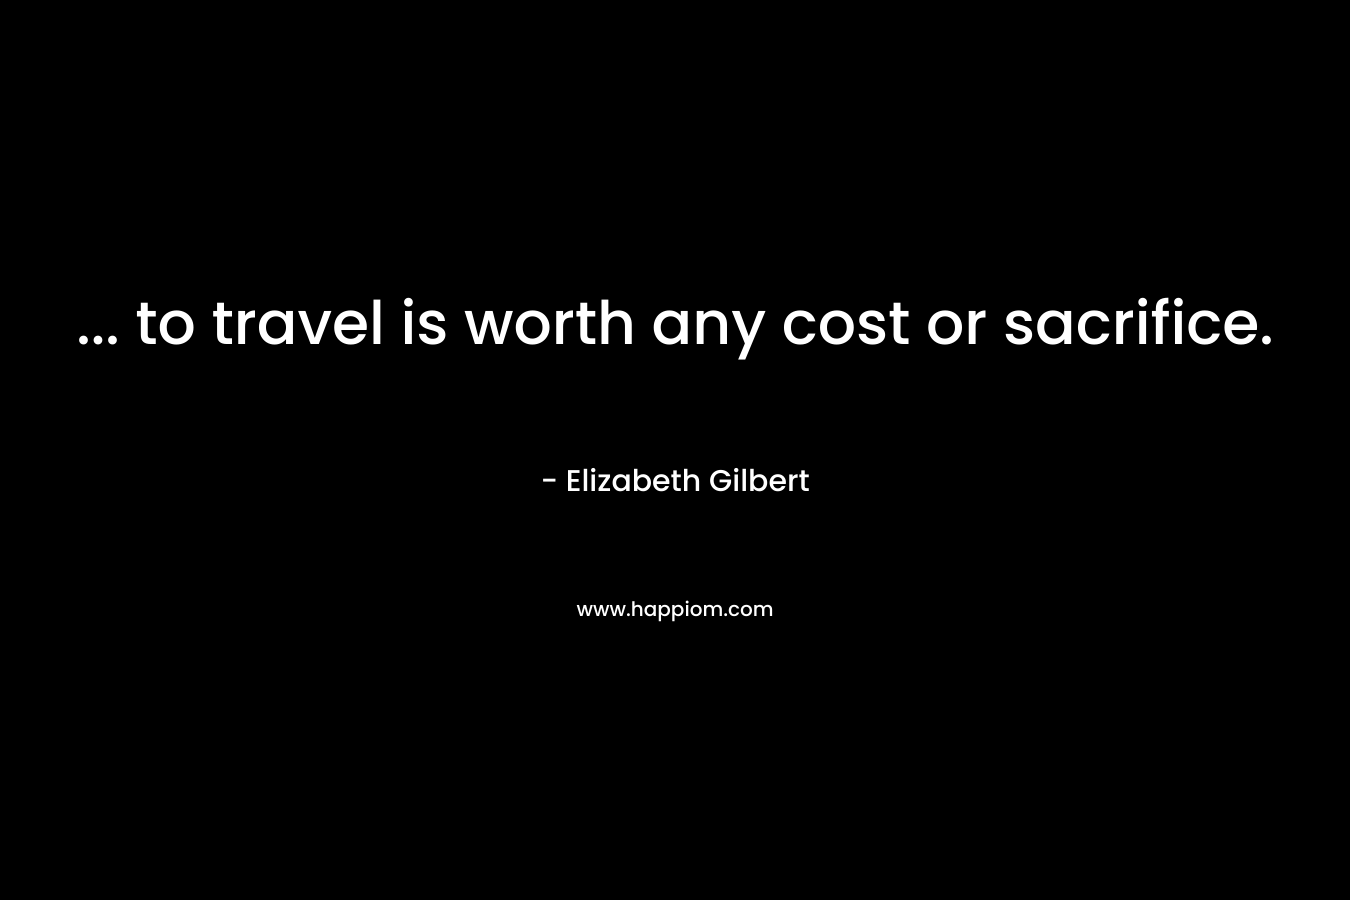 ... to travel is worth any cost or sacrifice.